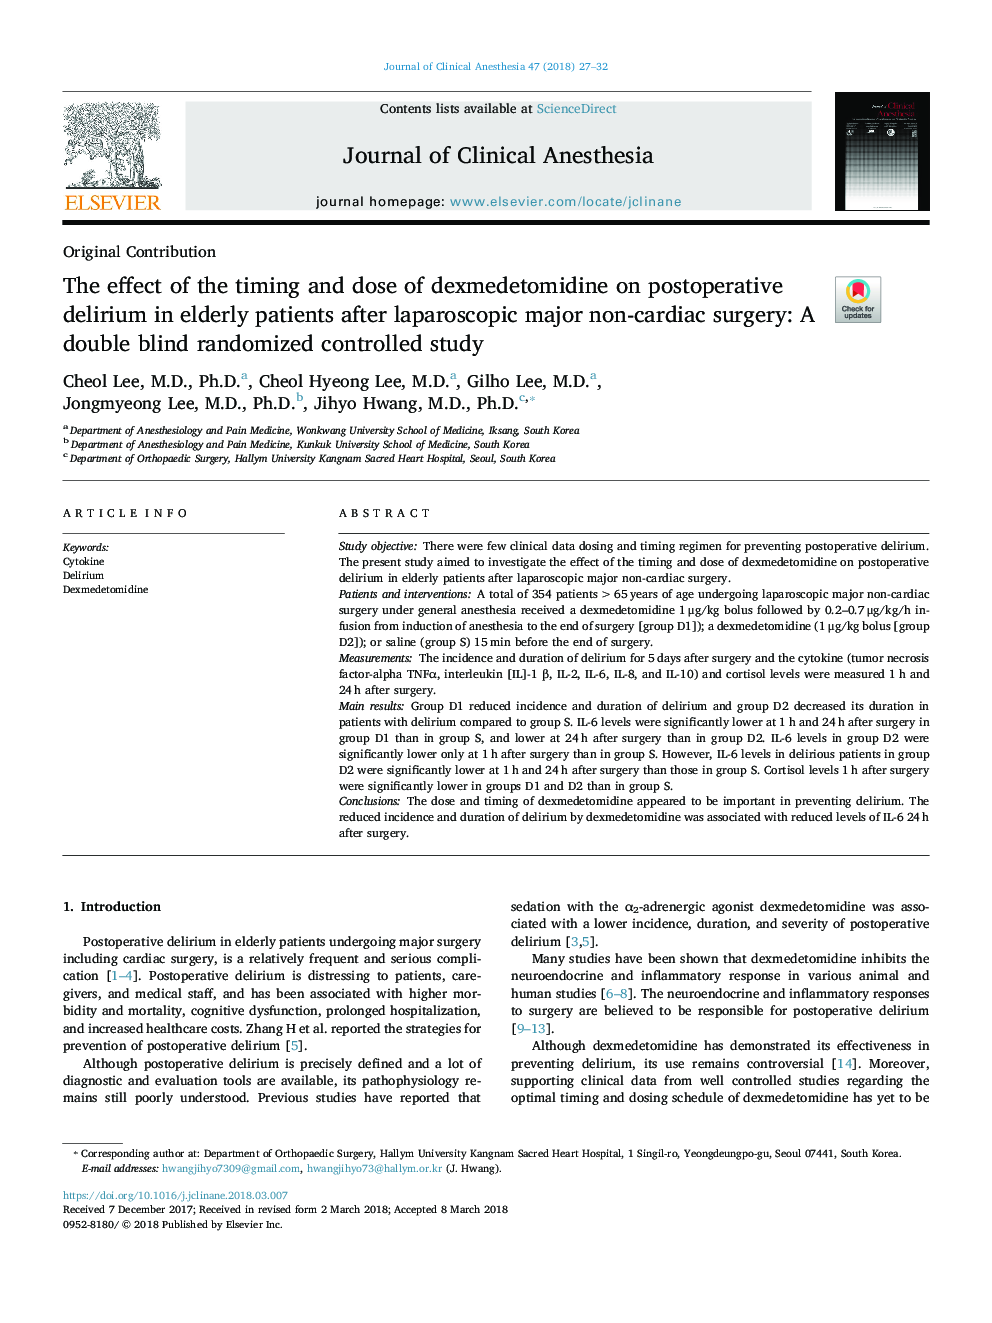 The effect of the timing and dose of dexmedetomidine on postoperative delirium in elderly patients after laparoscopic major non-cardiac surgery: A double blind randomized controlled study